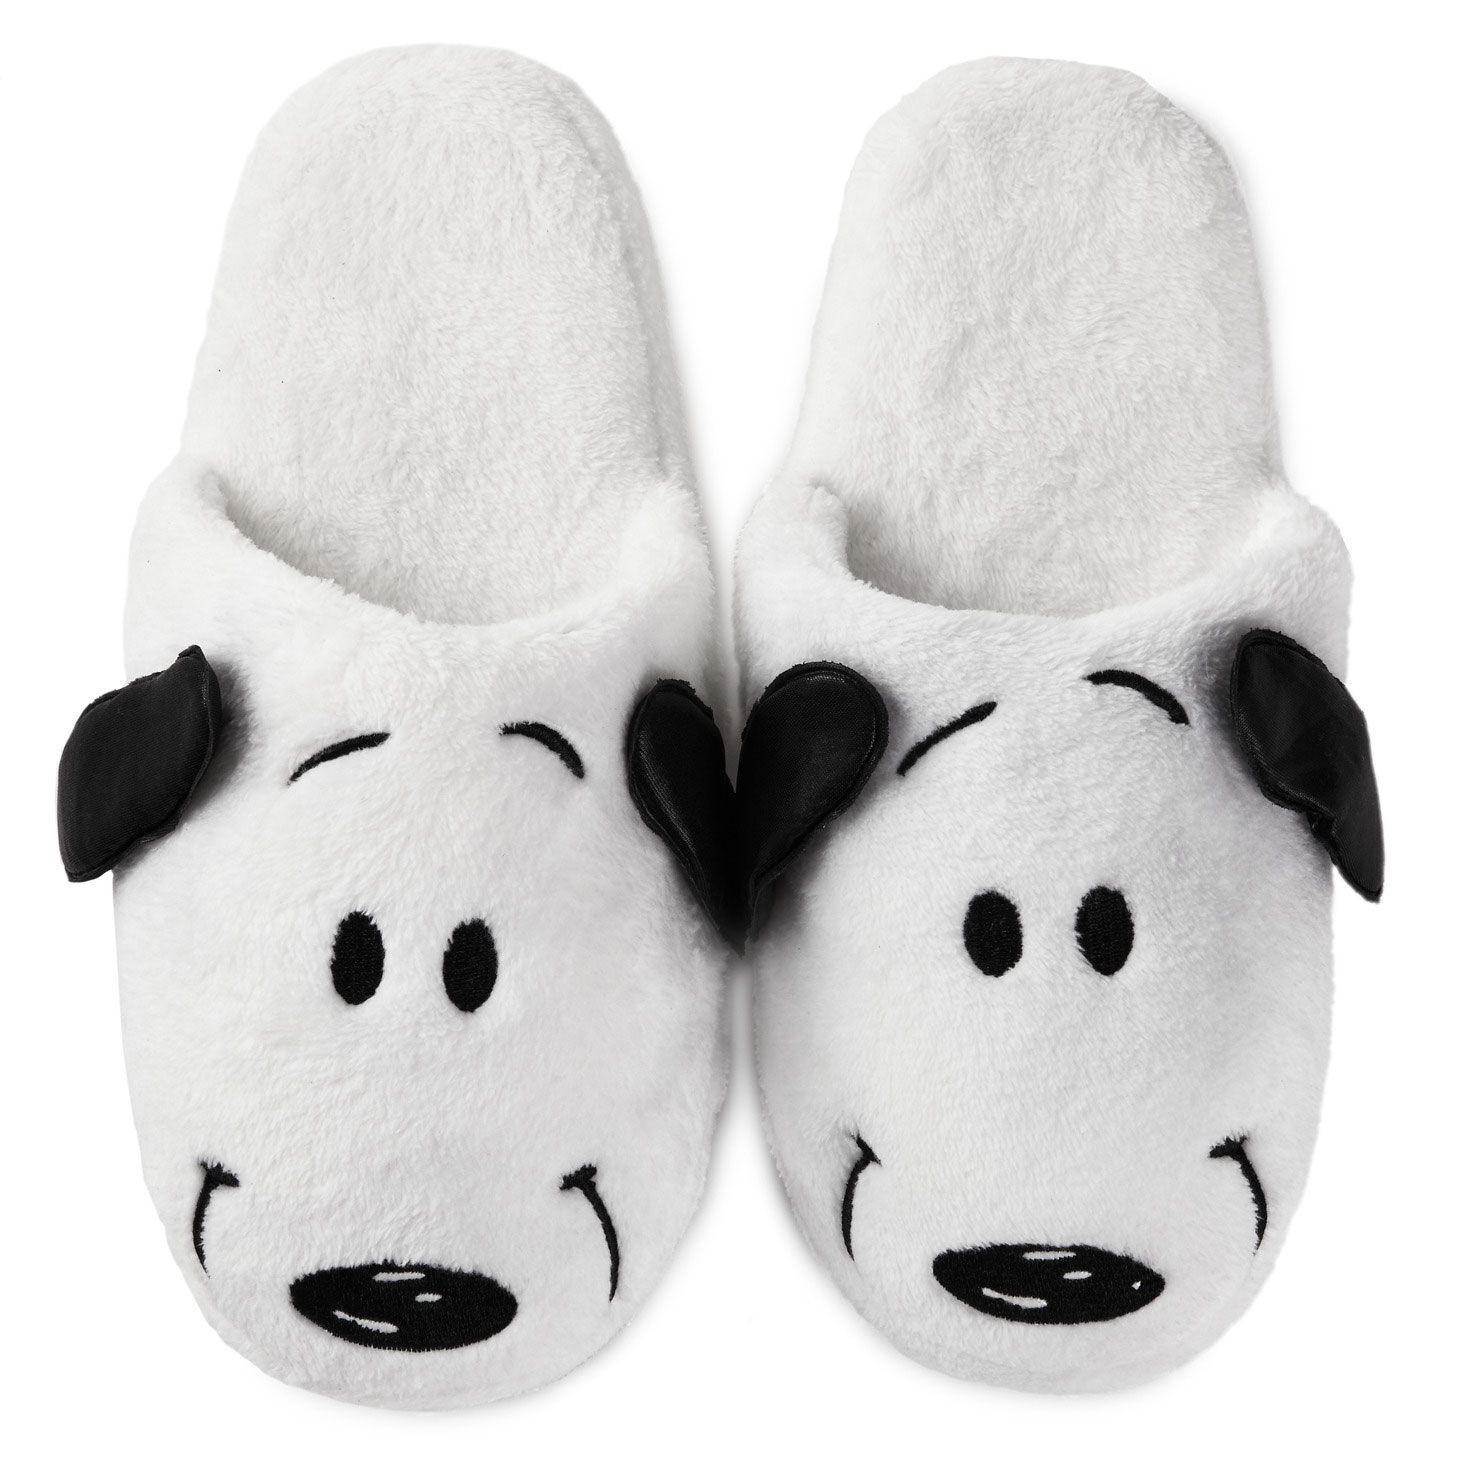 Peanuts® Snoopy Slippers With Sound, Small/Medium - & Slippers - Hallmark